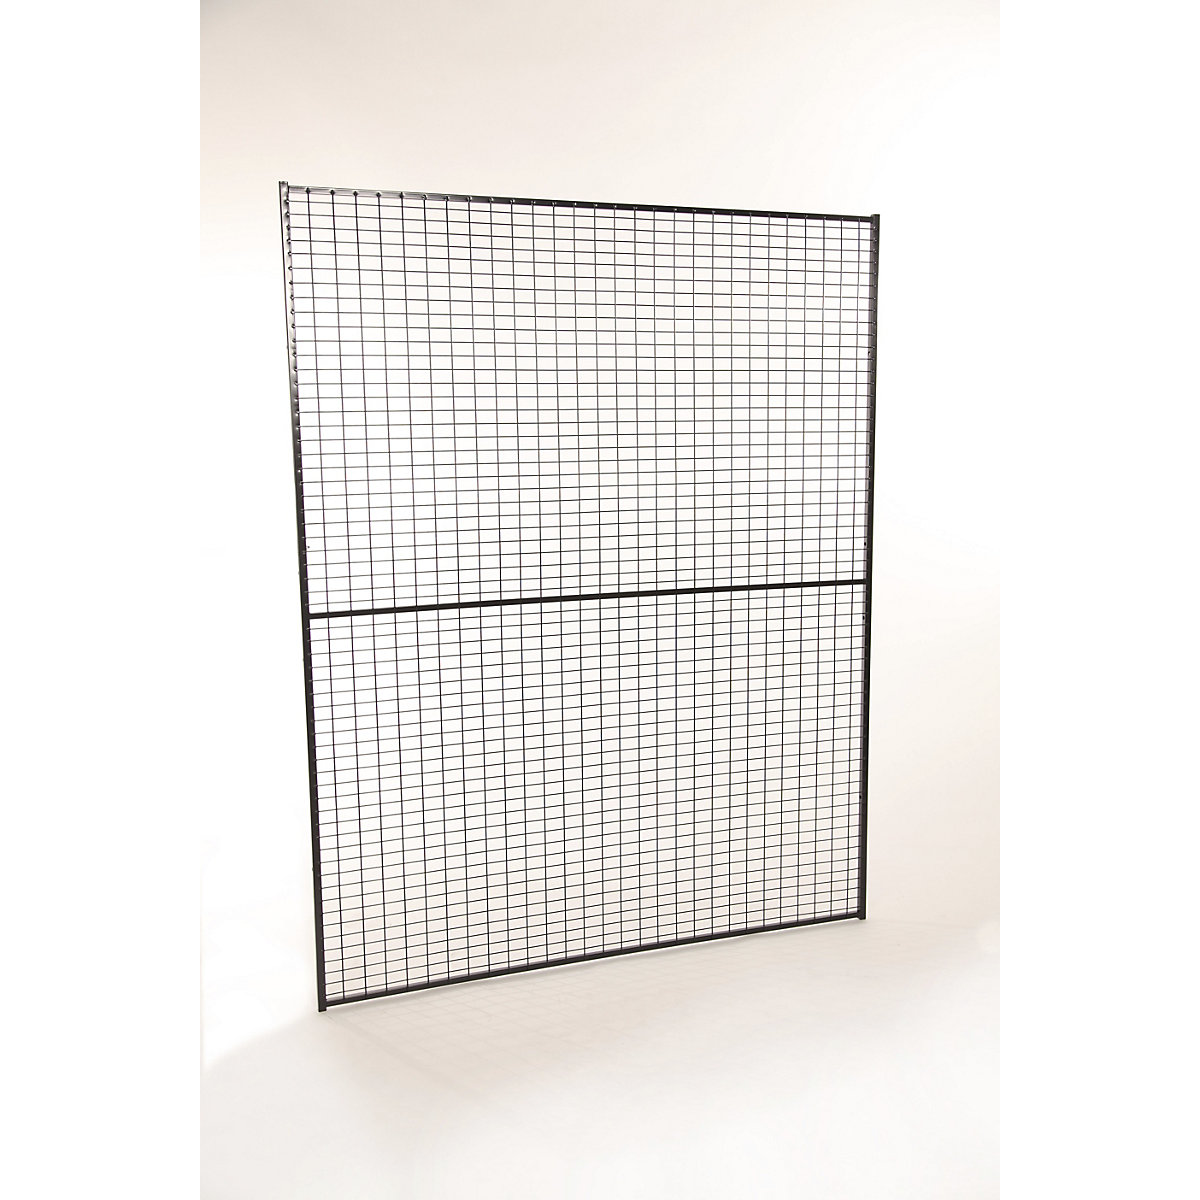 X-GUARD LITE machine protective fencing, wall section – Axelent, height 2200 mm, width 1200 mm-7